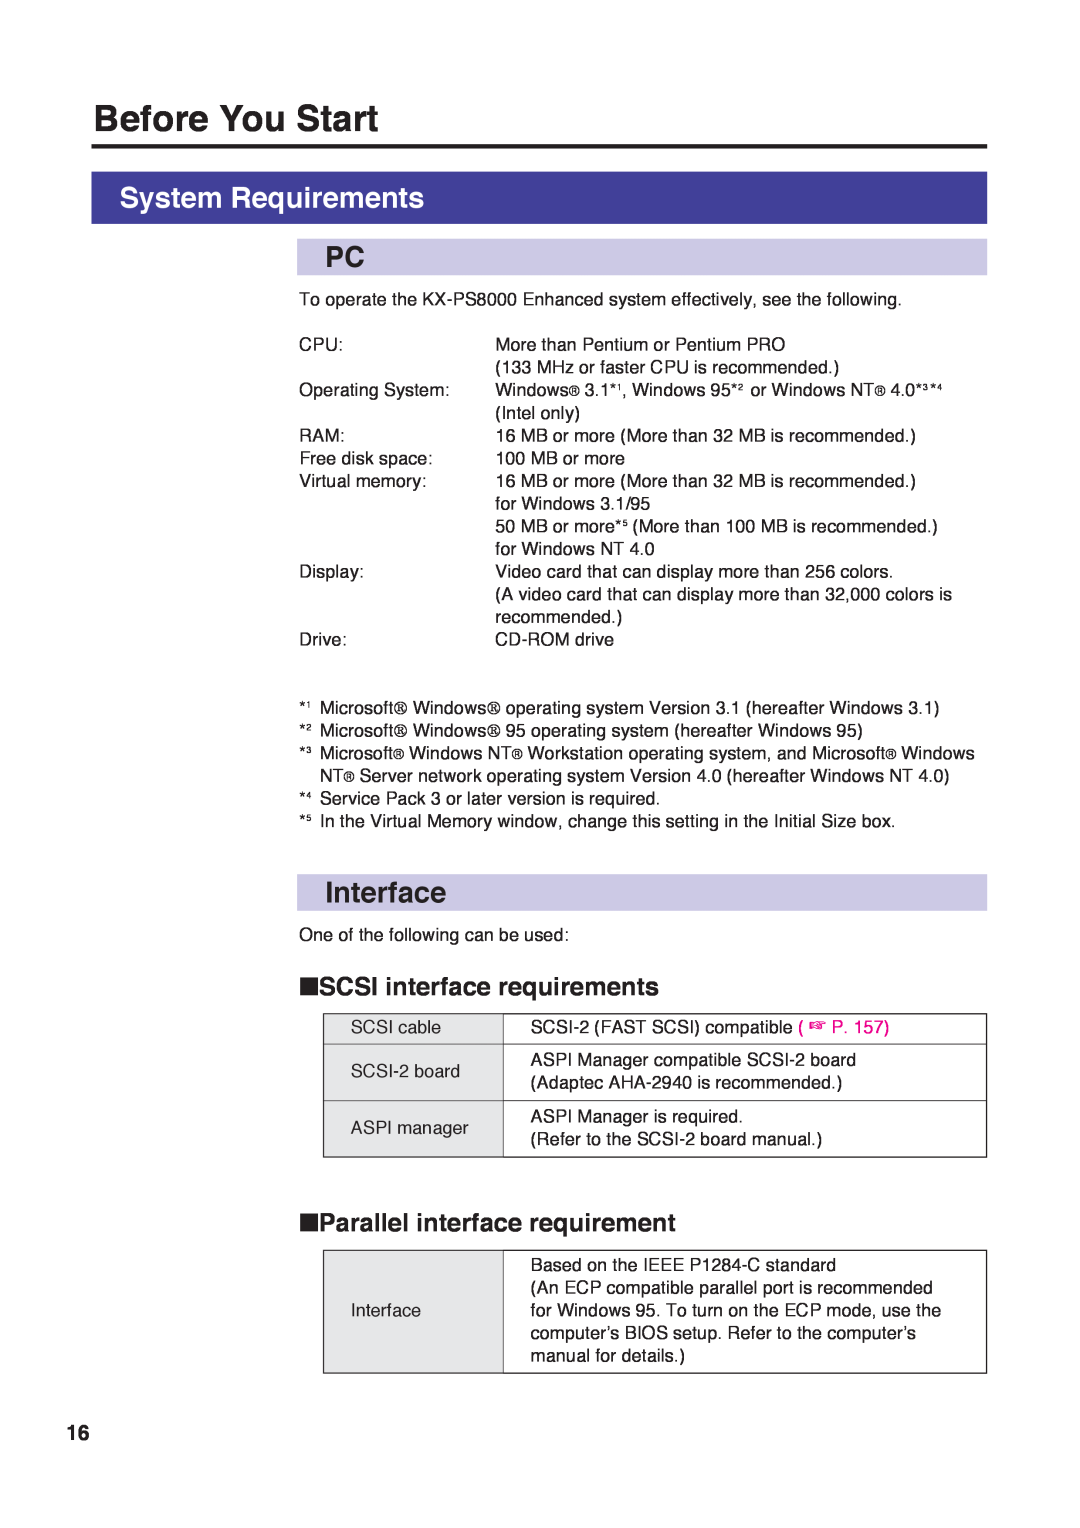 Panasonic KX-PS8000 manual System Requirements, Interface, SCSI interface requirements, Parallel interface requirement 